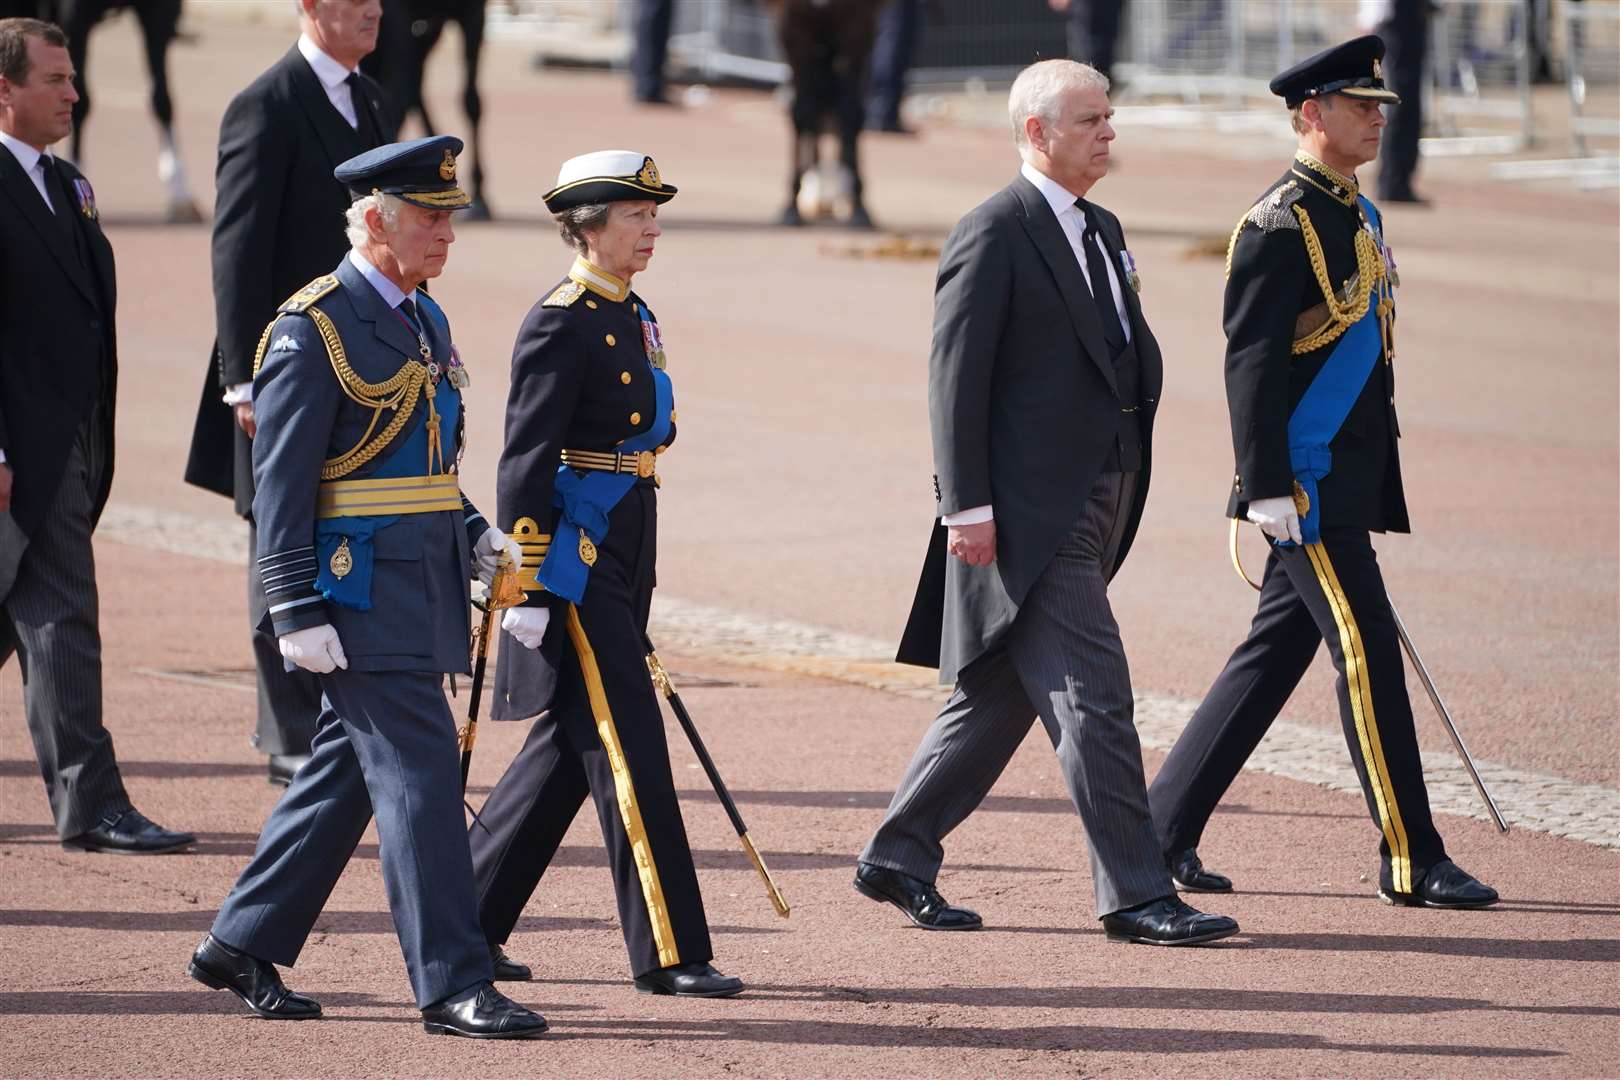 King Charles III, the Princes Royal, the Duke of York and the Earl of Wessex took part in the procession (Dominic Lipinski/PA)